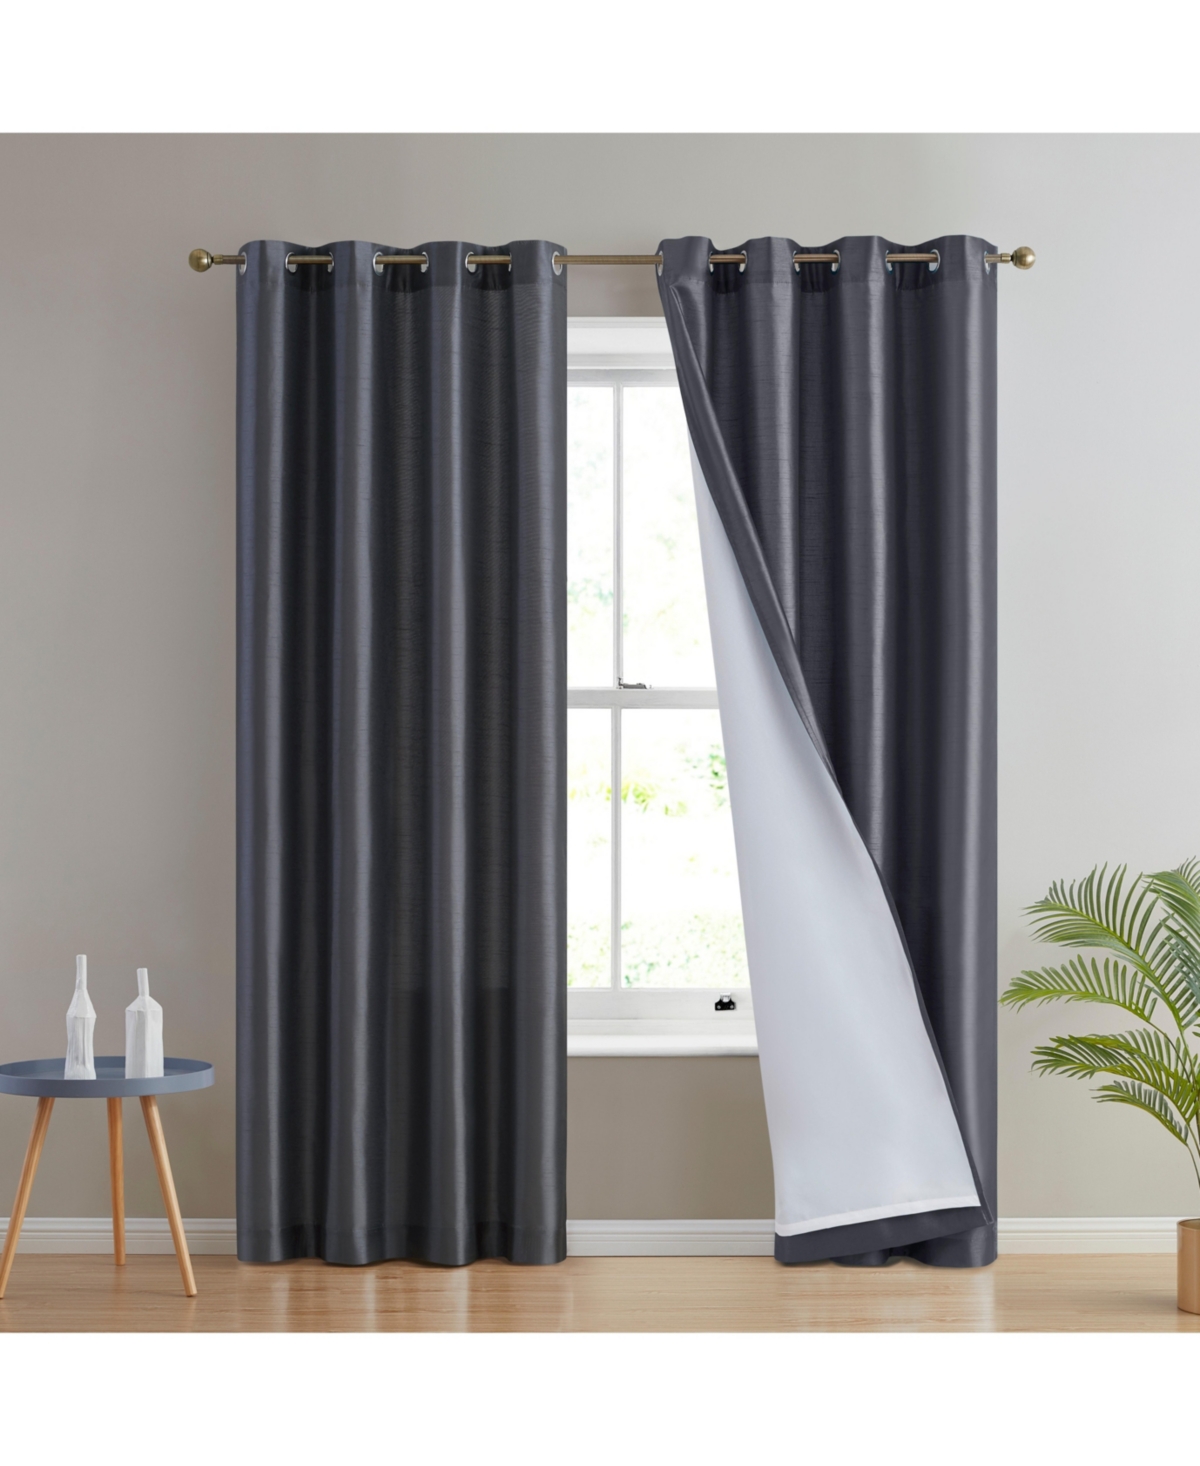 HLC.ME Abbey Faux Linen Textured Semi Sheer Privacy Sun Light Filtering Transparent Window Grommet Short Thick Curtains Drapery Panels for Bedroom 